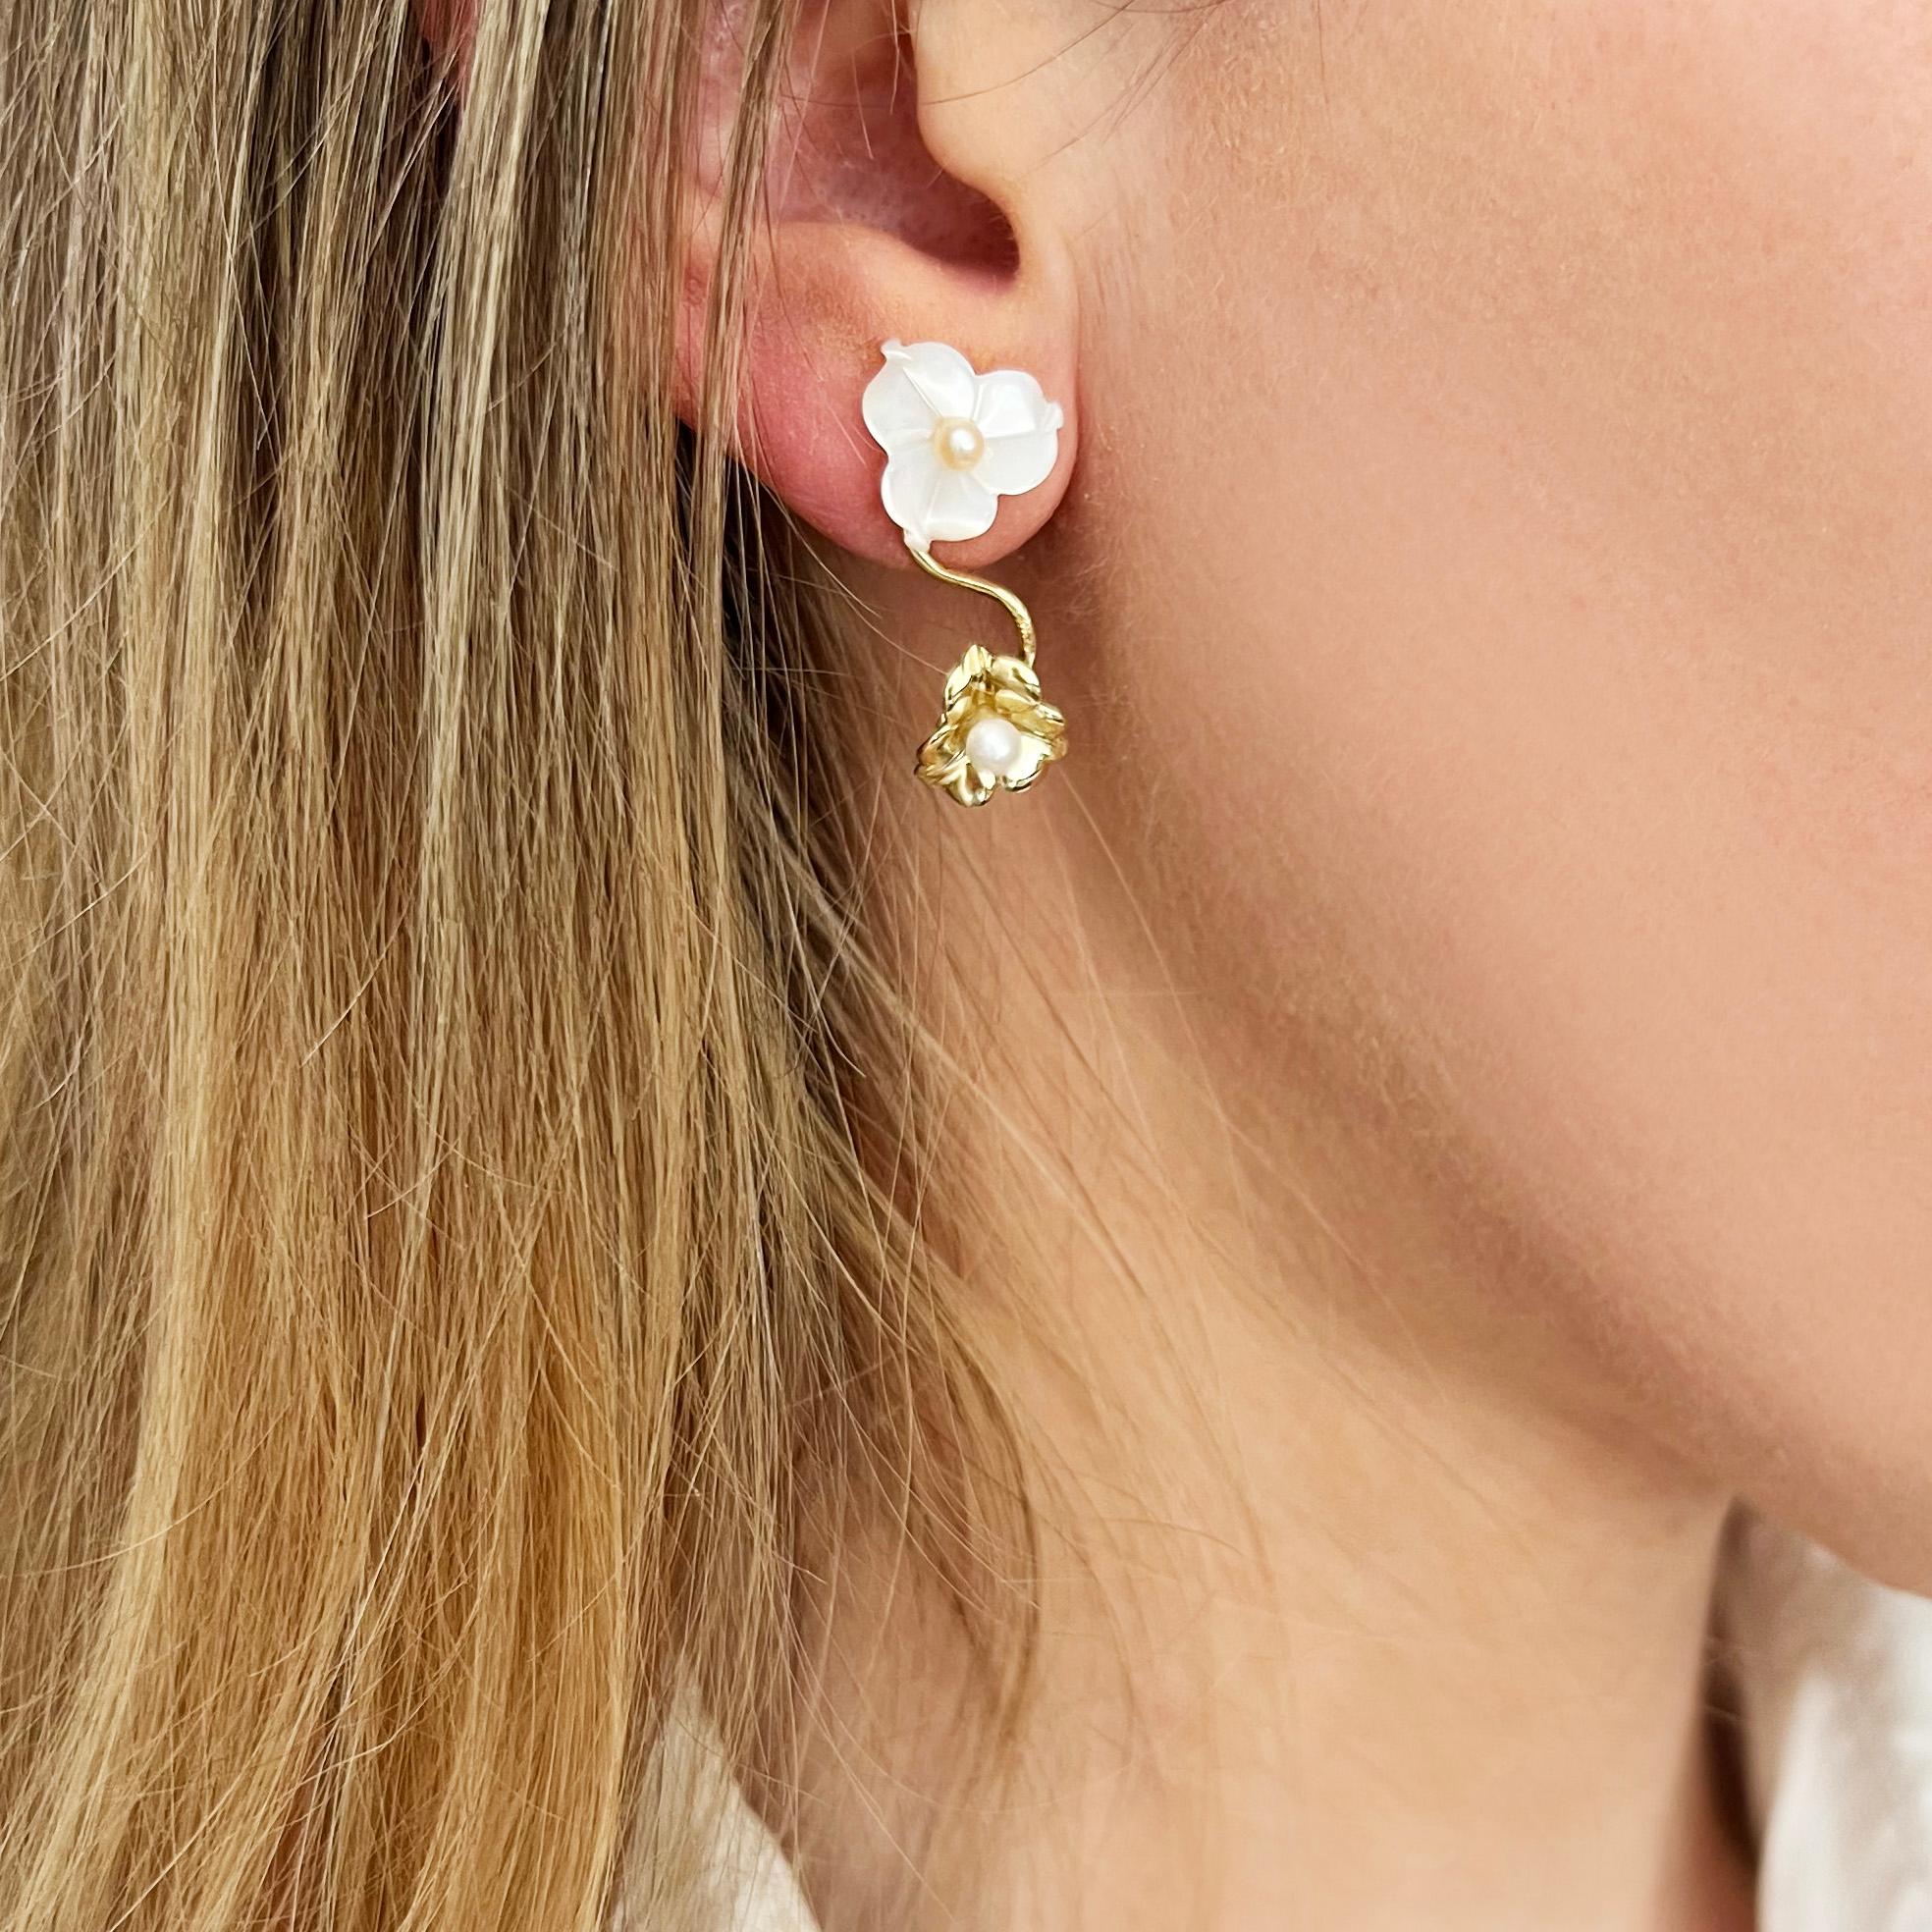 Fashion Earrings in 18k yellow gold with Mother of Pearls (in a particular flower cut) and white Pearls ( 3-3.5 mm). Handemade in Italy by Stanoppi Jewellery since 1948.  Blooming flowers, synonymous with serenity

g. 5.8

All Stanoppi Jewelry is